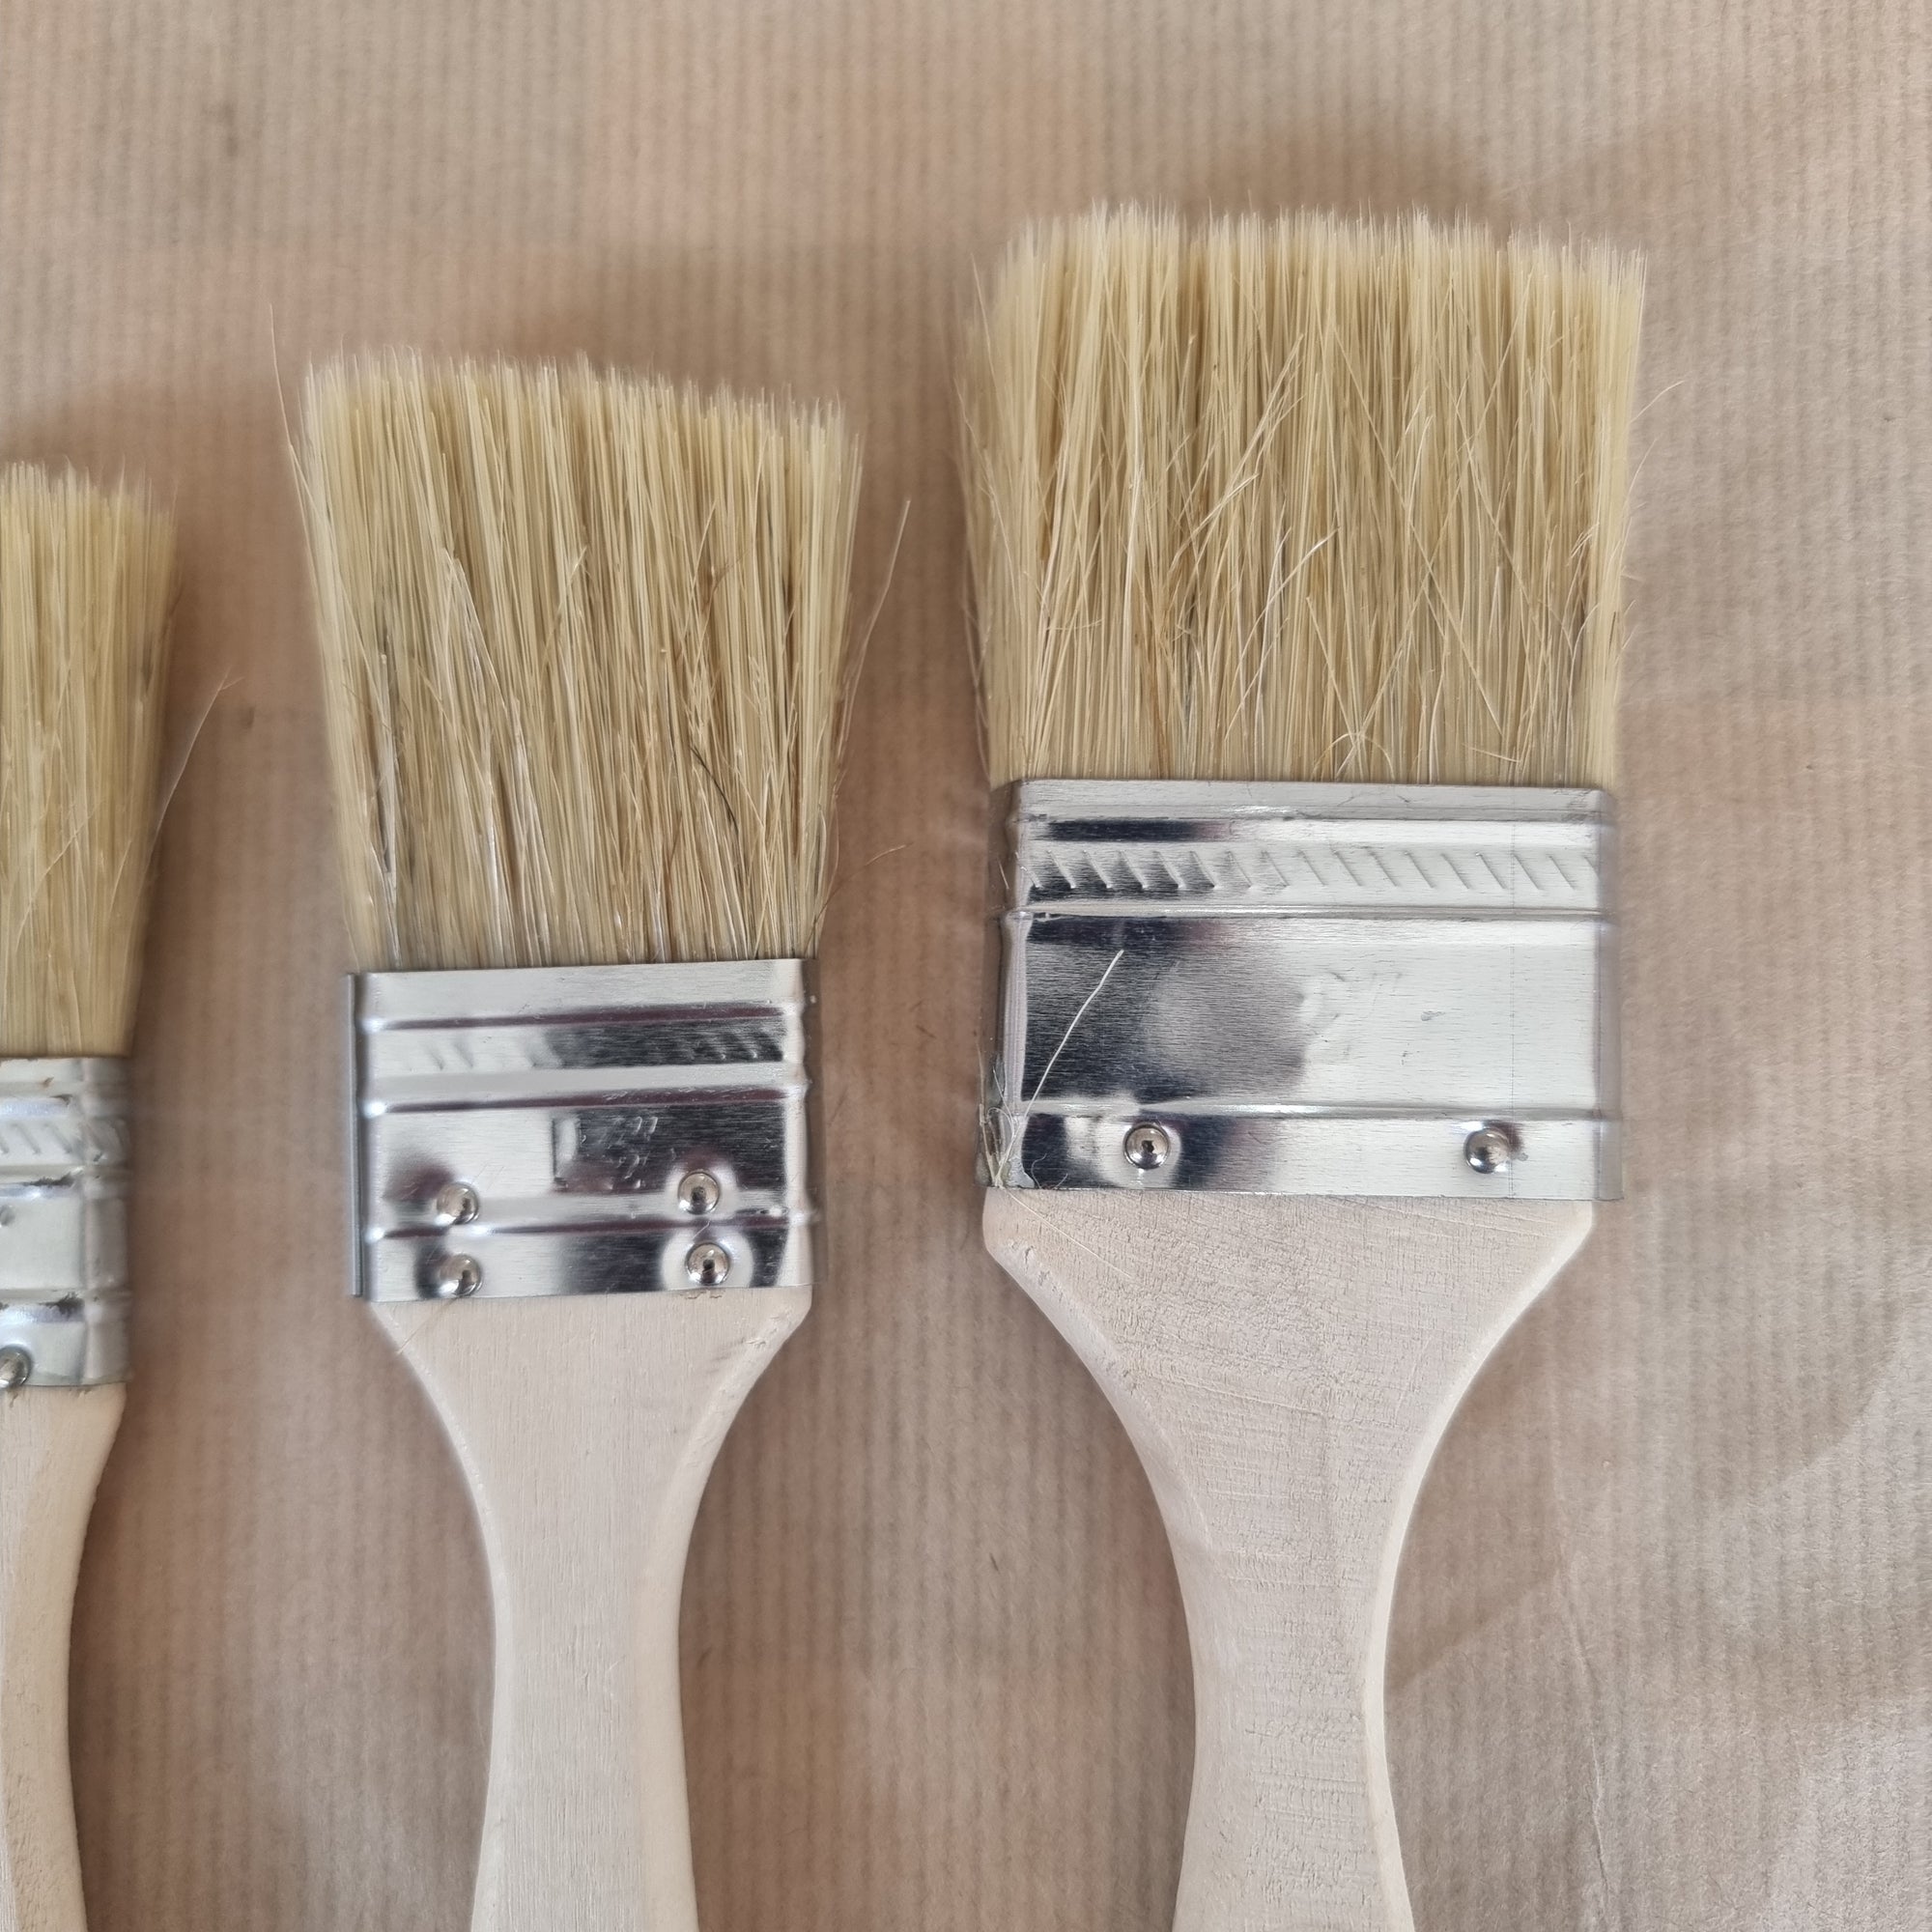 Painter's Wooden Paint Brushes